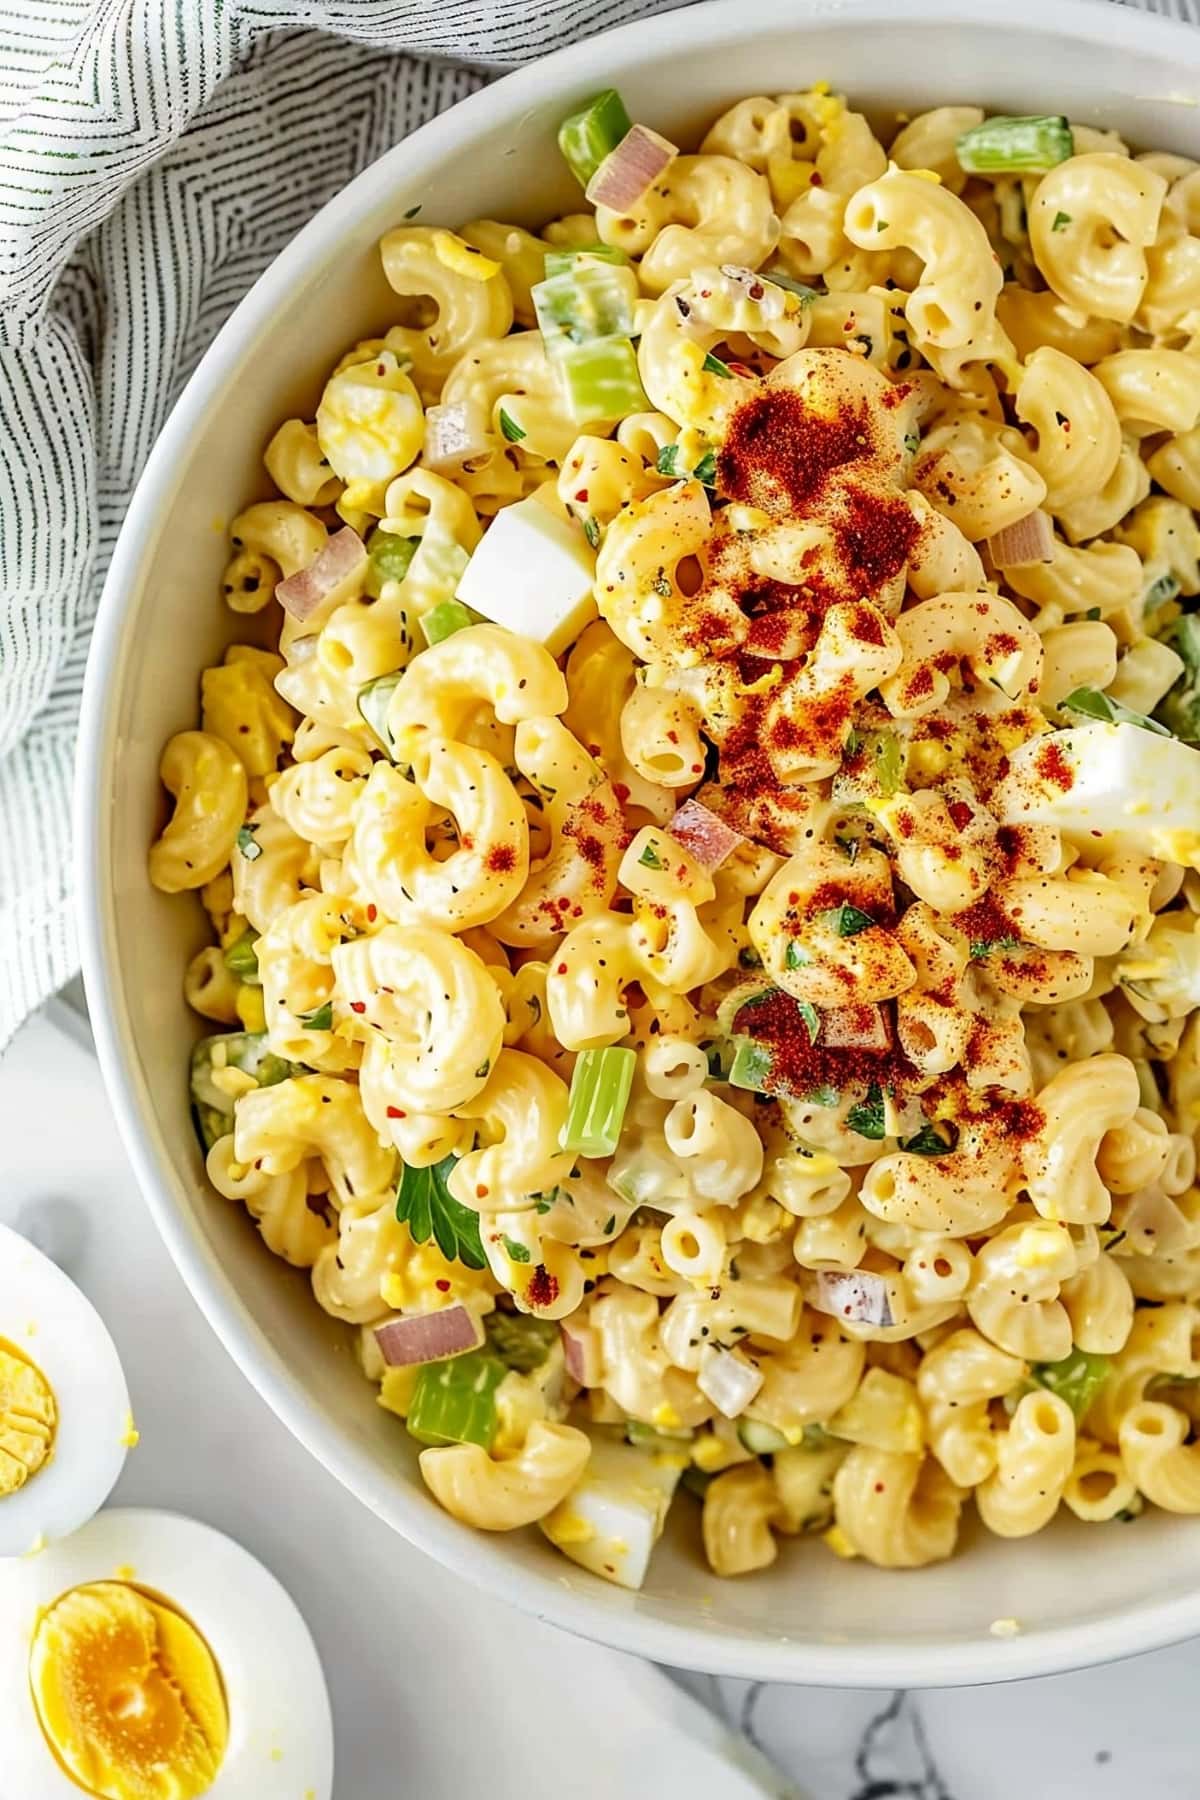 Creamy and tangy homemade deviled egg macaroni pasta salad with chopped egg whites and spices